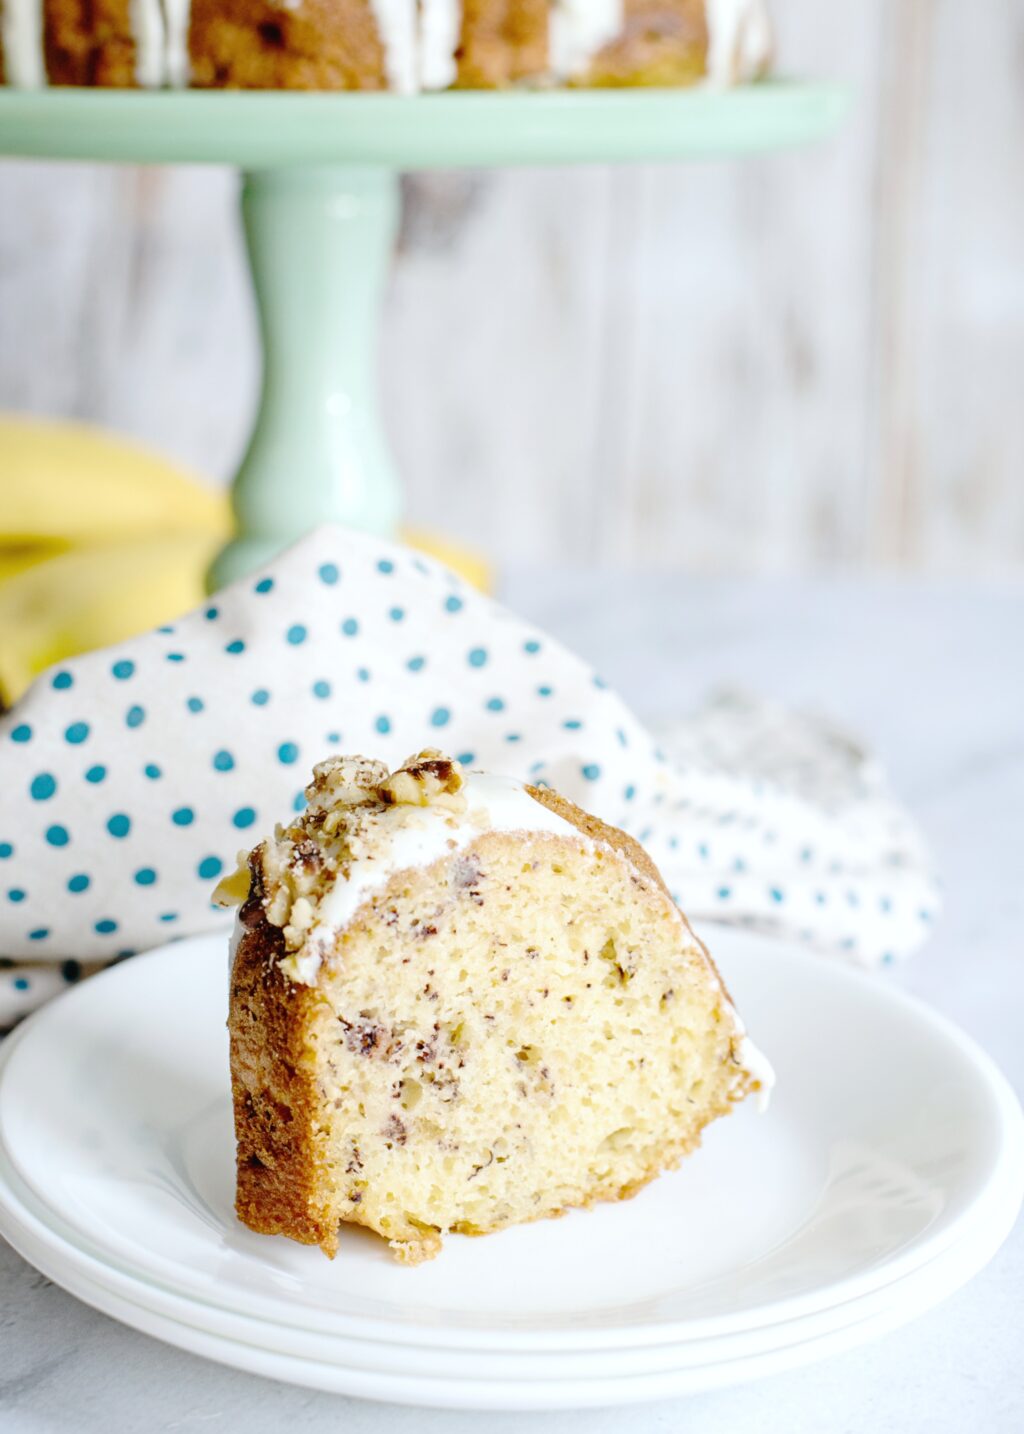 A piece of banana bundt cake cut on a white plate. A cake pedestal is view behind it, along with a polka dot napkin.